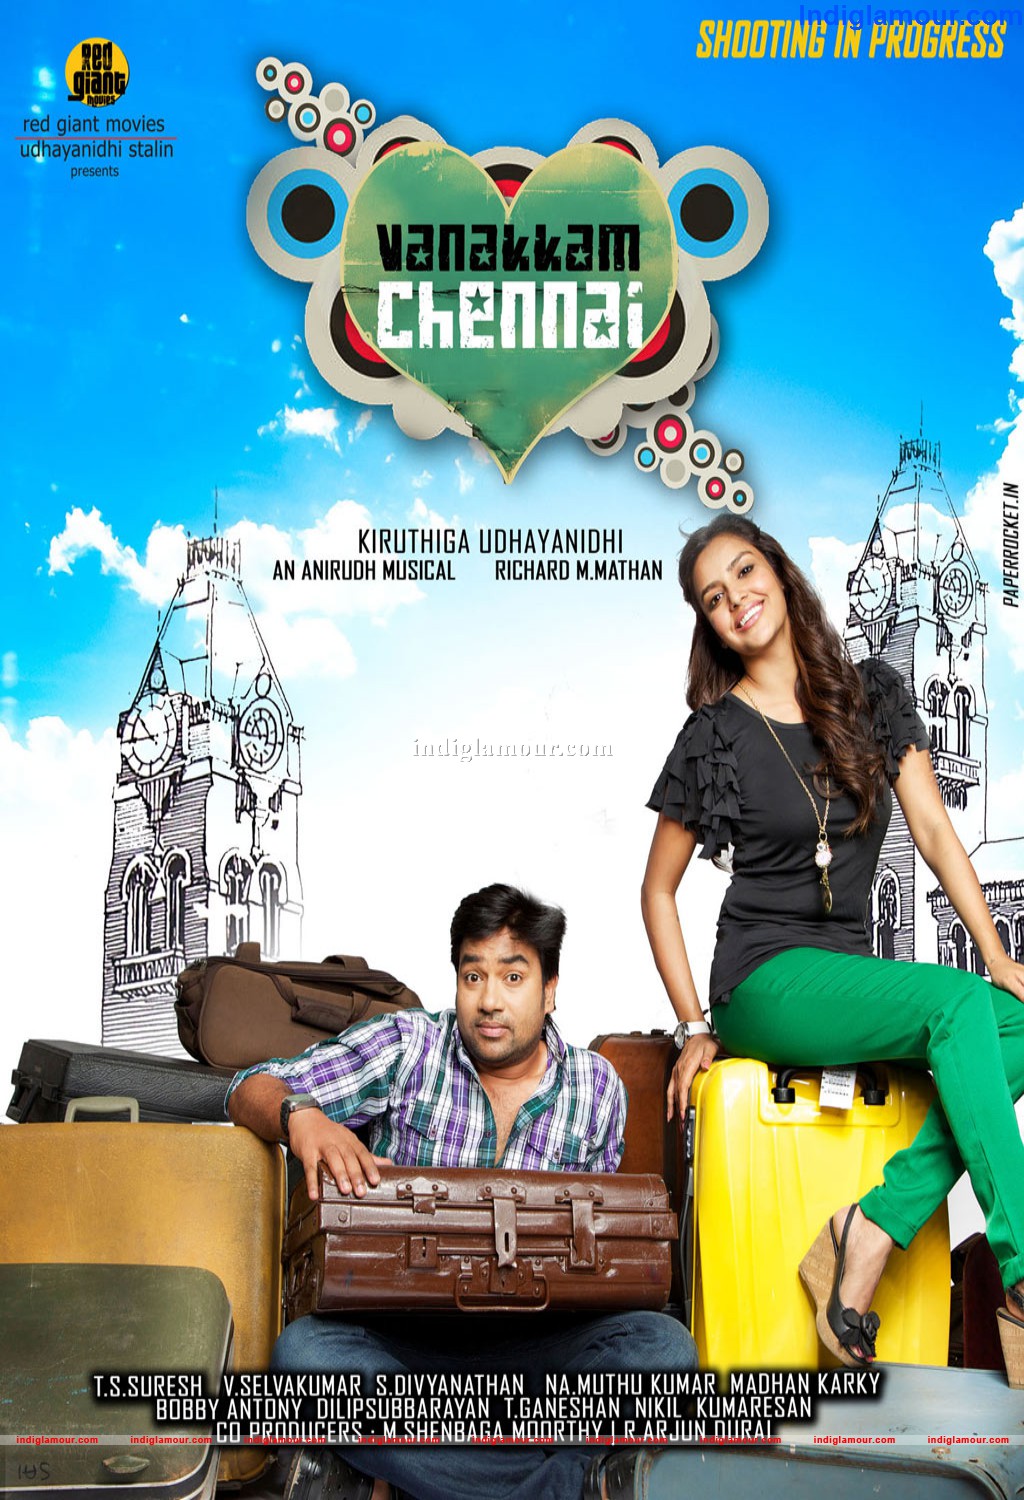 Vanakkam Chennai Movie HD photos,images,pics,stills and picture ...